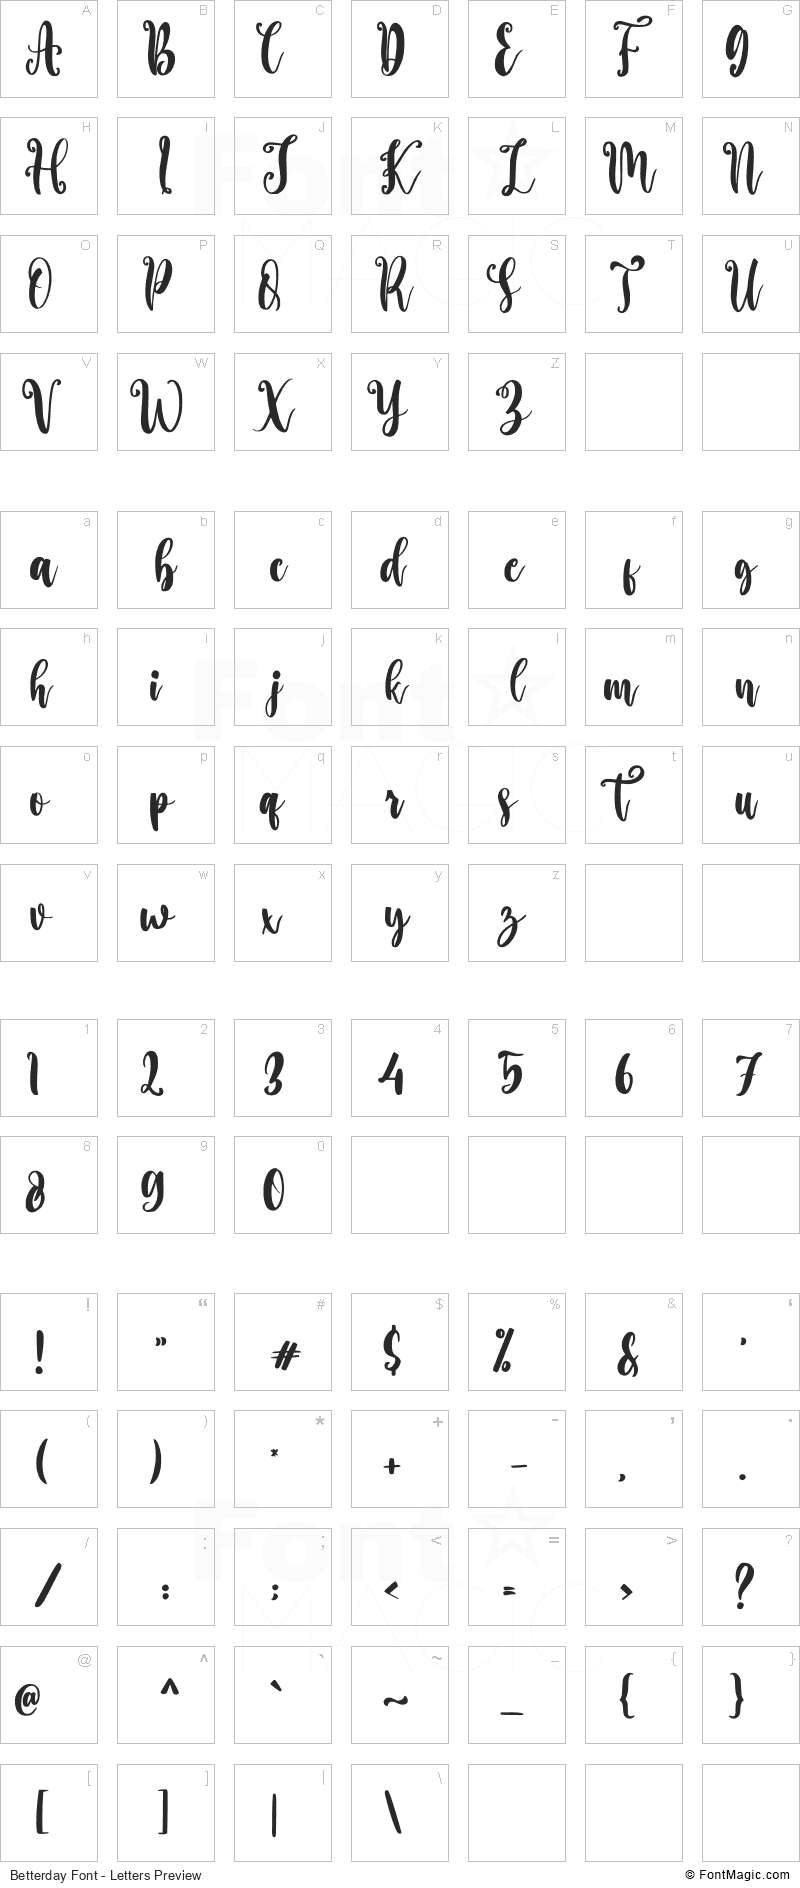 Betterday Font - All Latters Preview Chart